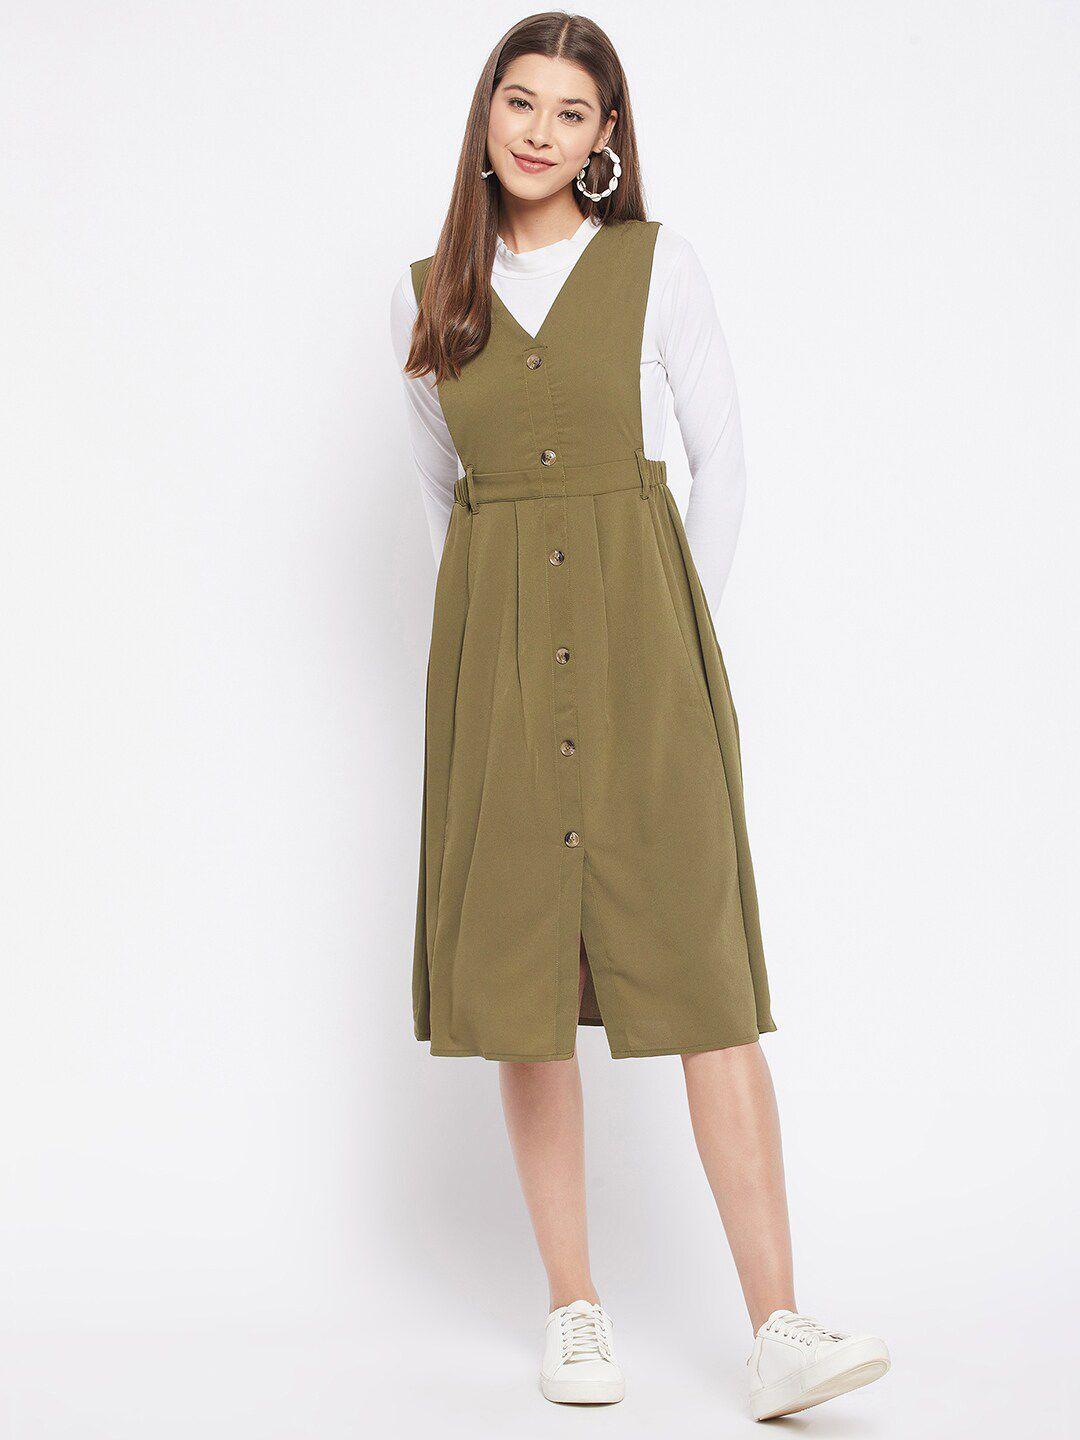 winered olive green solid pinafore dress